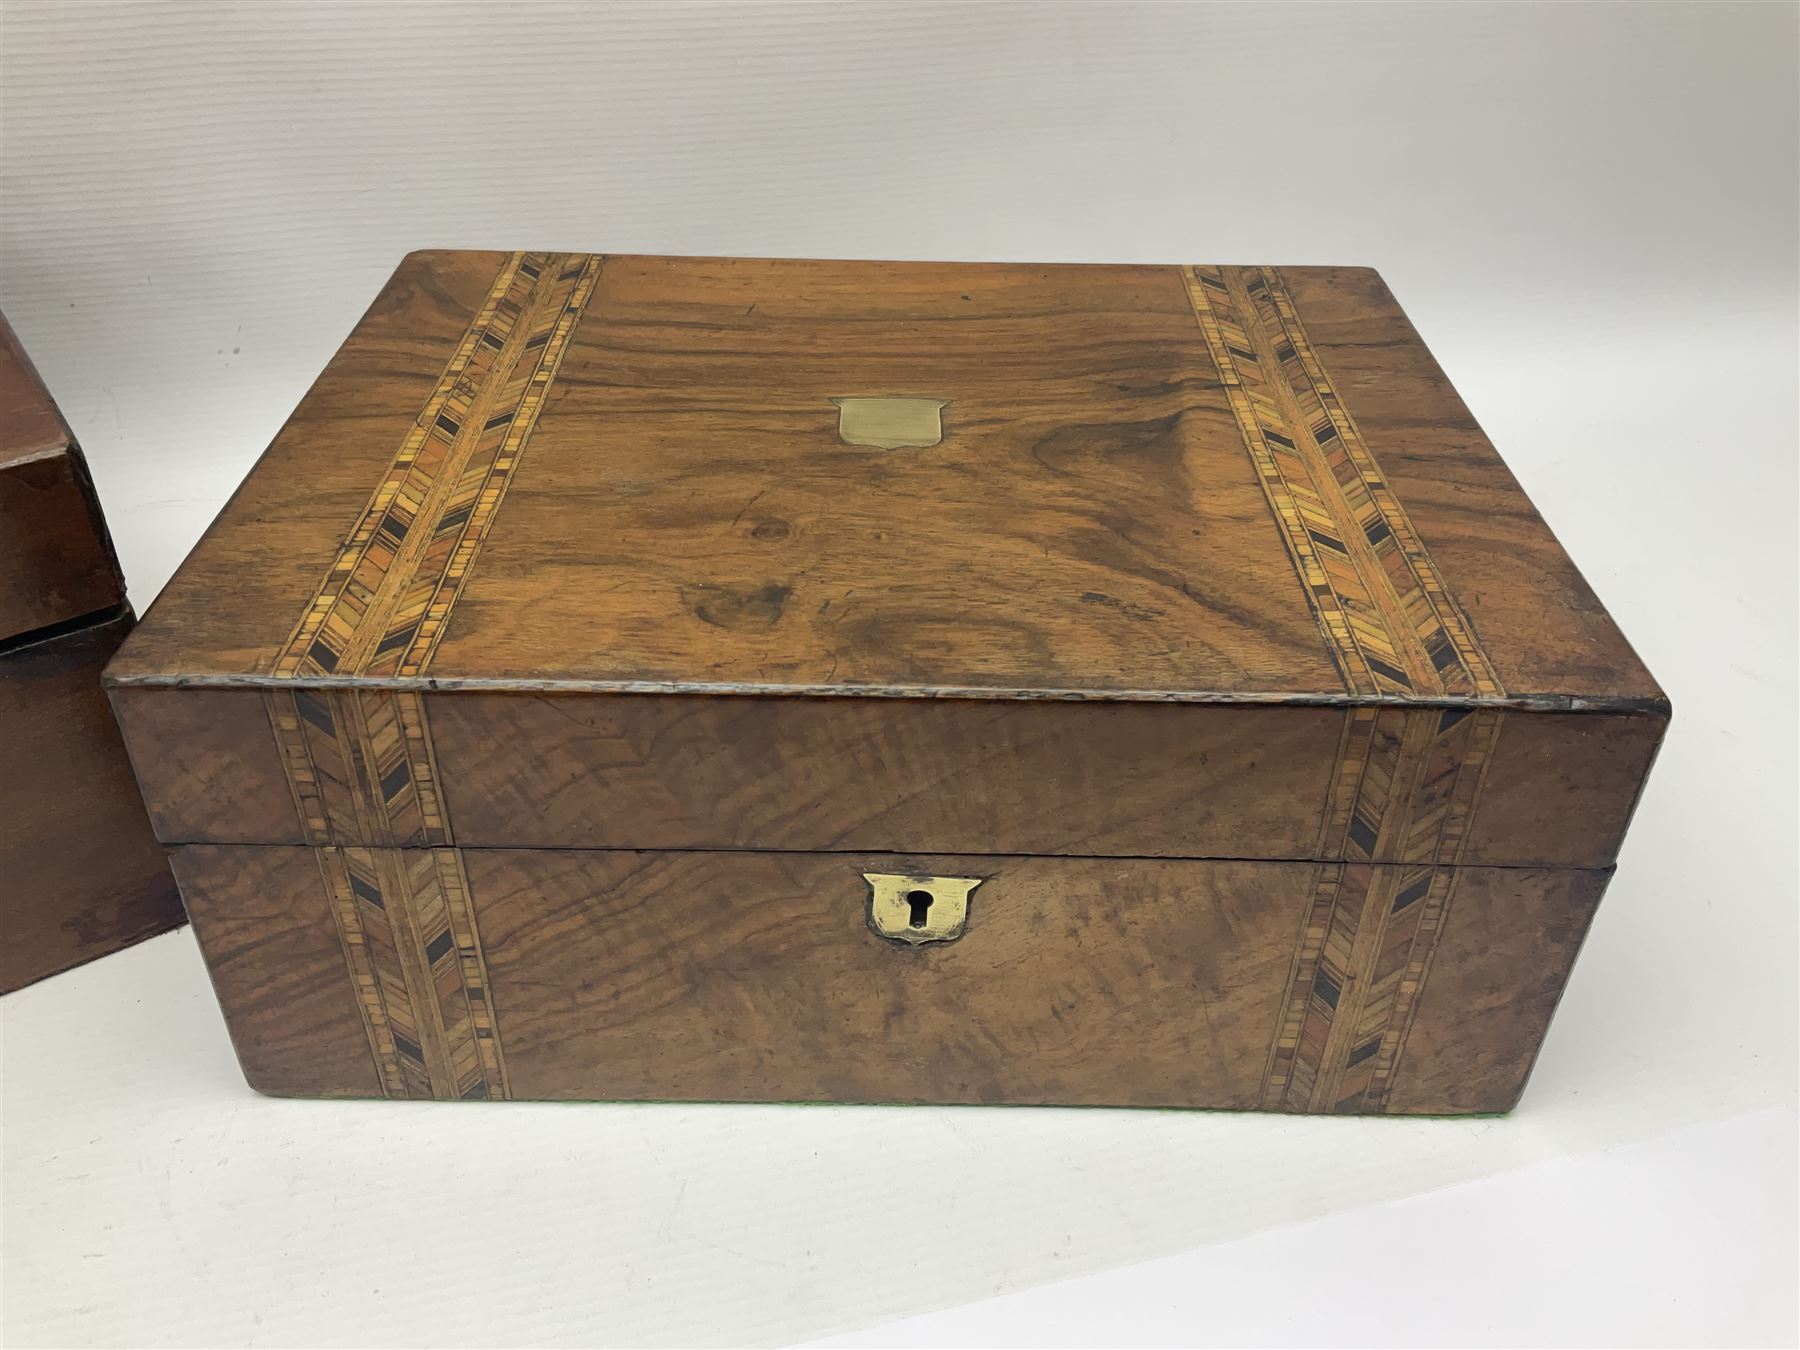 Victorian walnut and parquetry banded work box with brass shield and escutcheon - Image 14 of 14